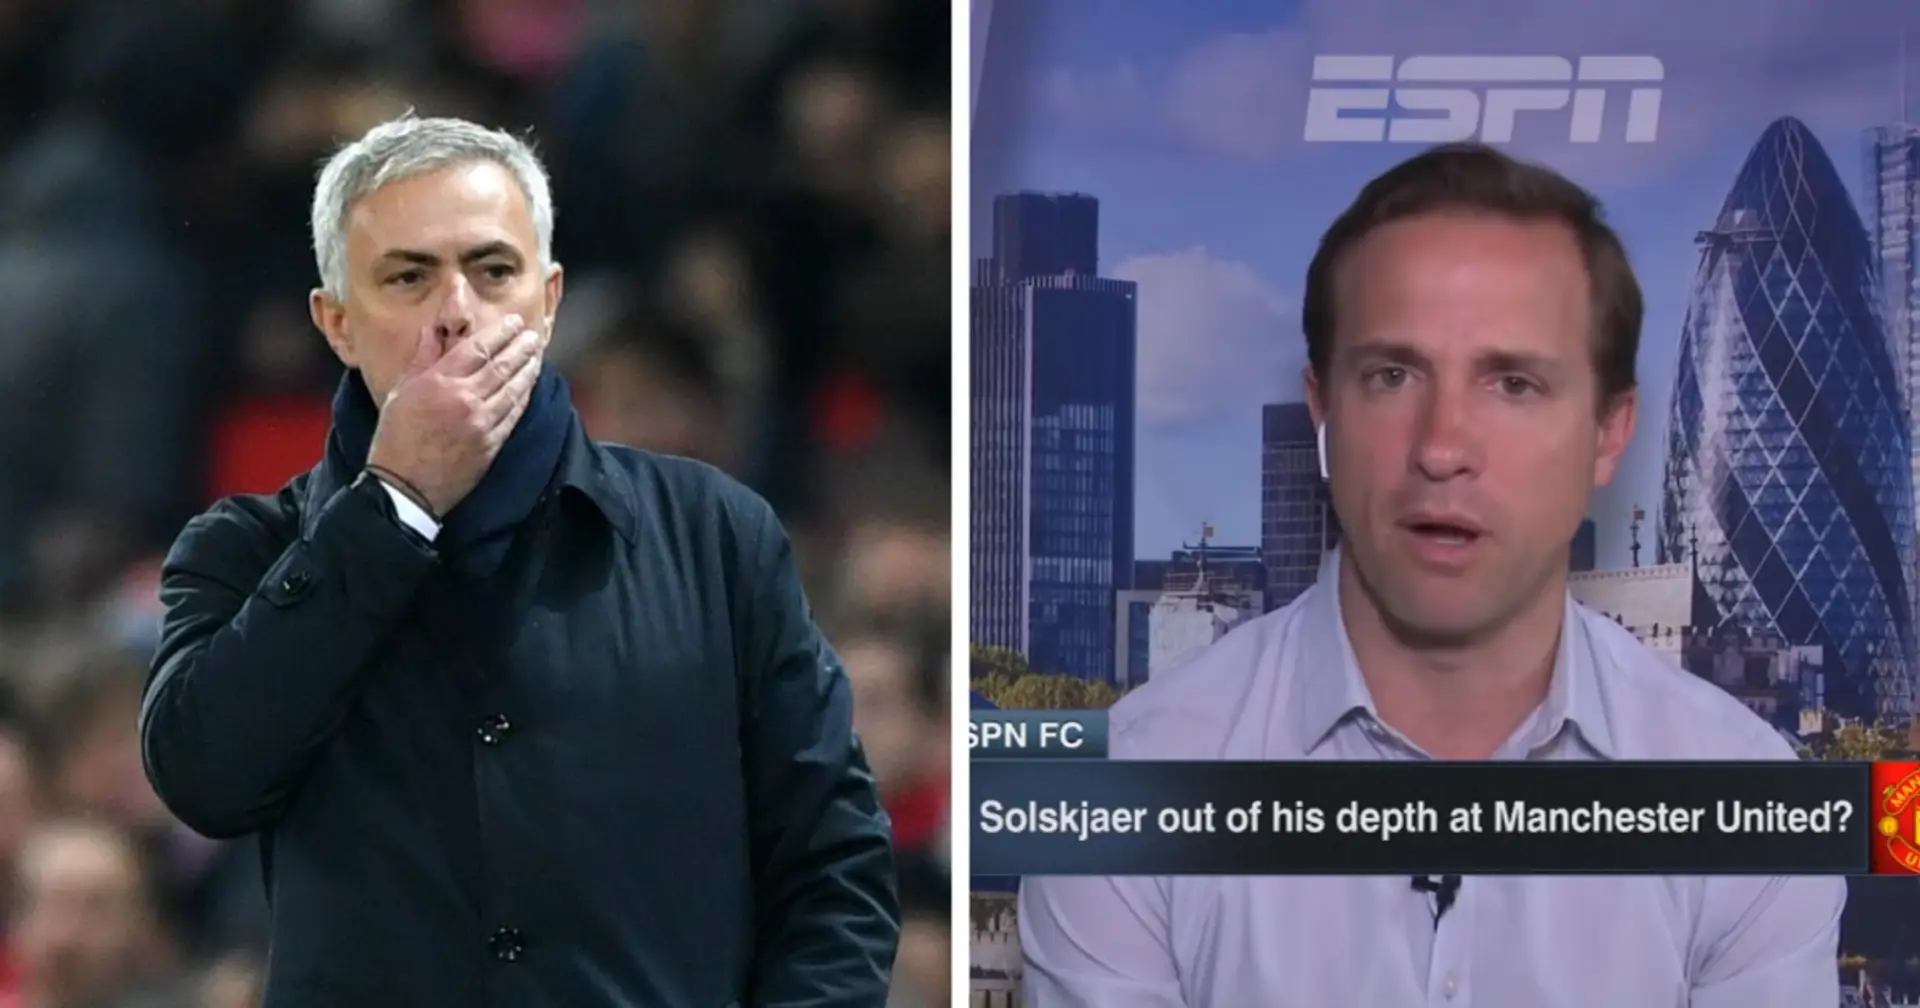 Tottenham vs Man United: will Mourinho prove that Solskjaer is 'out of his depth'? (video)